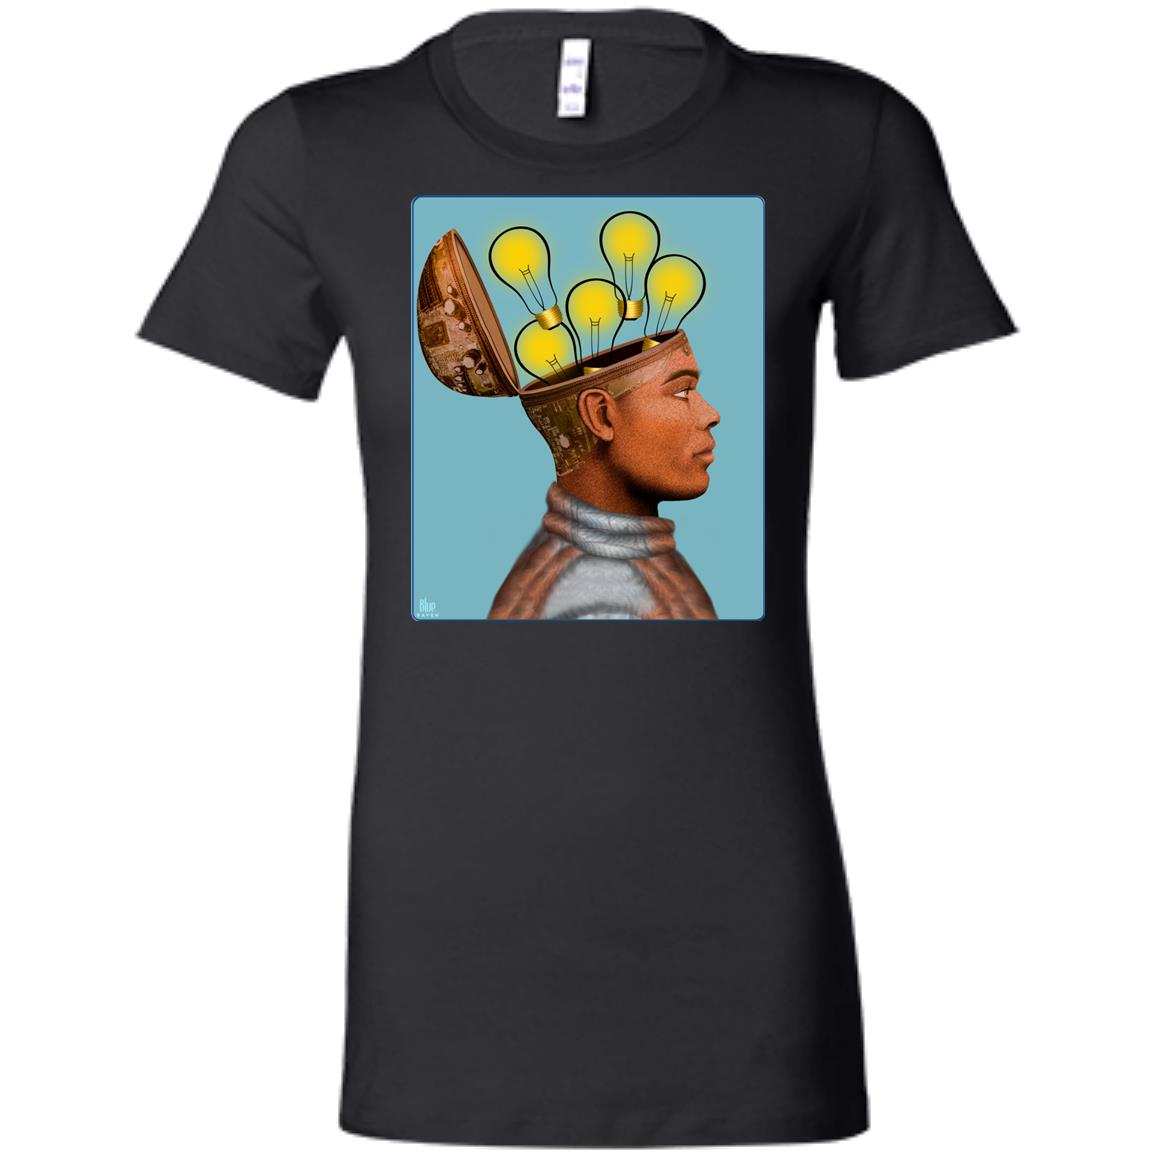 Future Humans - Women's Fitted T-Shirt